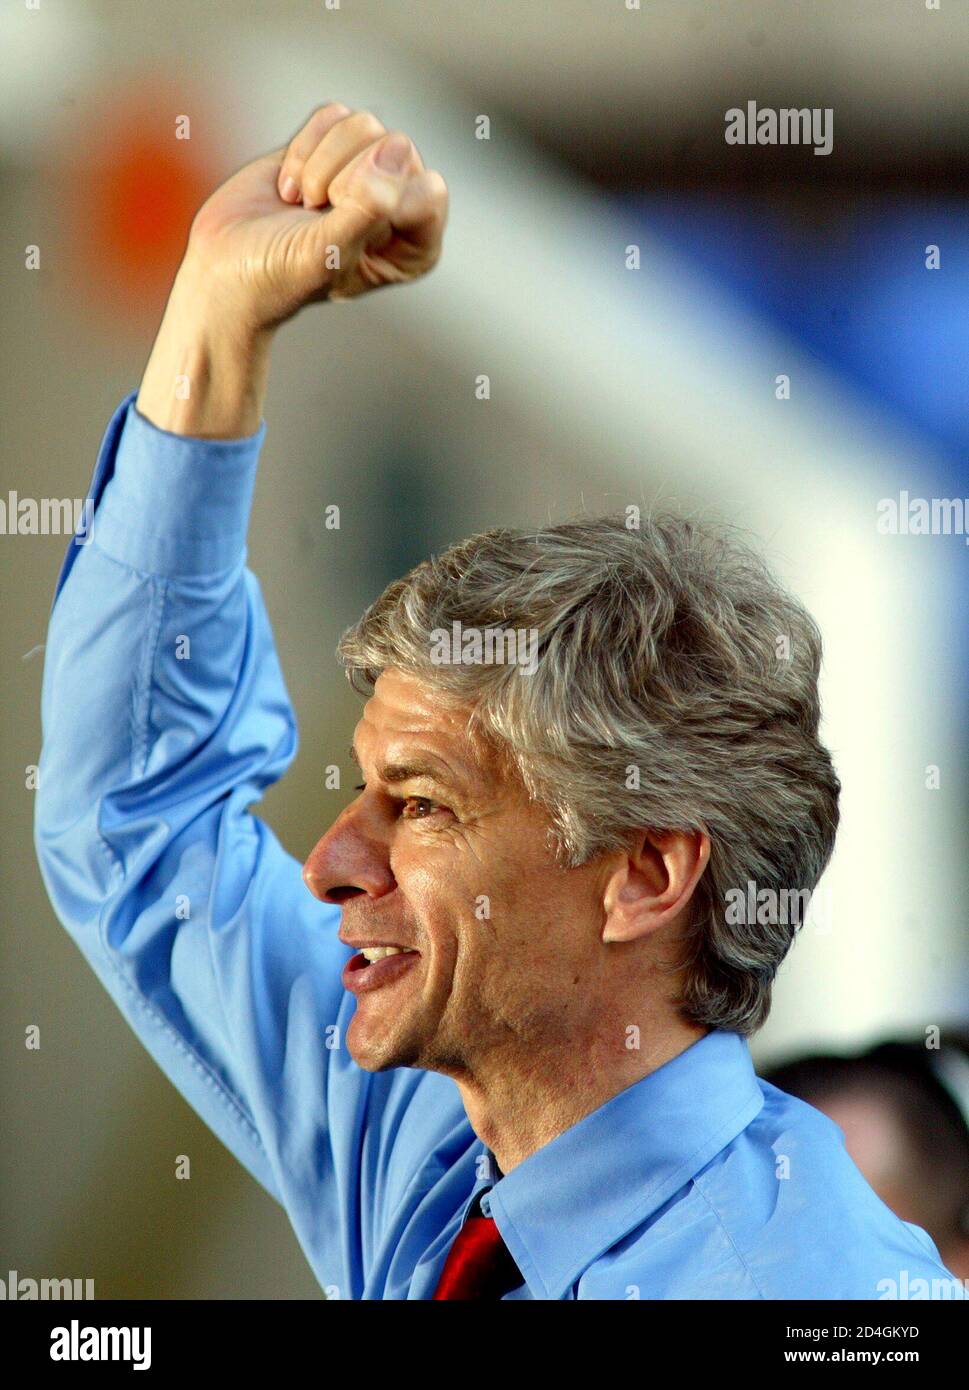 Arsenal's manager Arsene Wenger of France smiles after his side drew 2-2 with Tottenham Hotspur to win the English premier league title at White Hart Lane, London, April 25, 2004. Arsenal were crowned English champions for the 13th time on Sunday after their 2-2 draw at London rivals Tottenham Hotspur gave them an unassailable 10-point lead at the top of the standings.  ? ONLINE/INTERNET USAGE WITHOUT FAPL LICENCE. FOR DETAILS SEE WWW.FAPLWEB.COM Banque D'Images